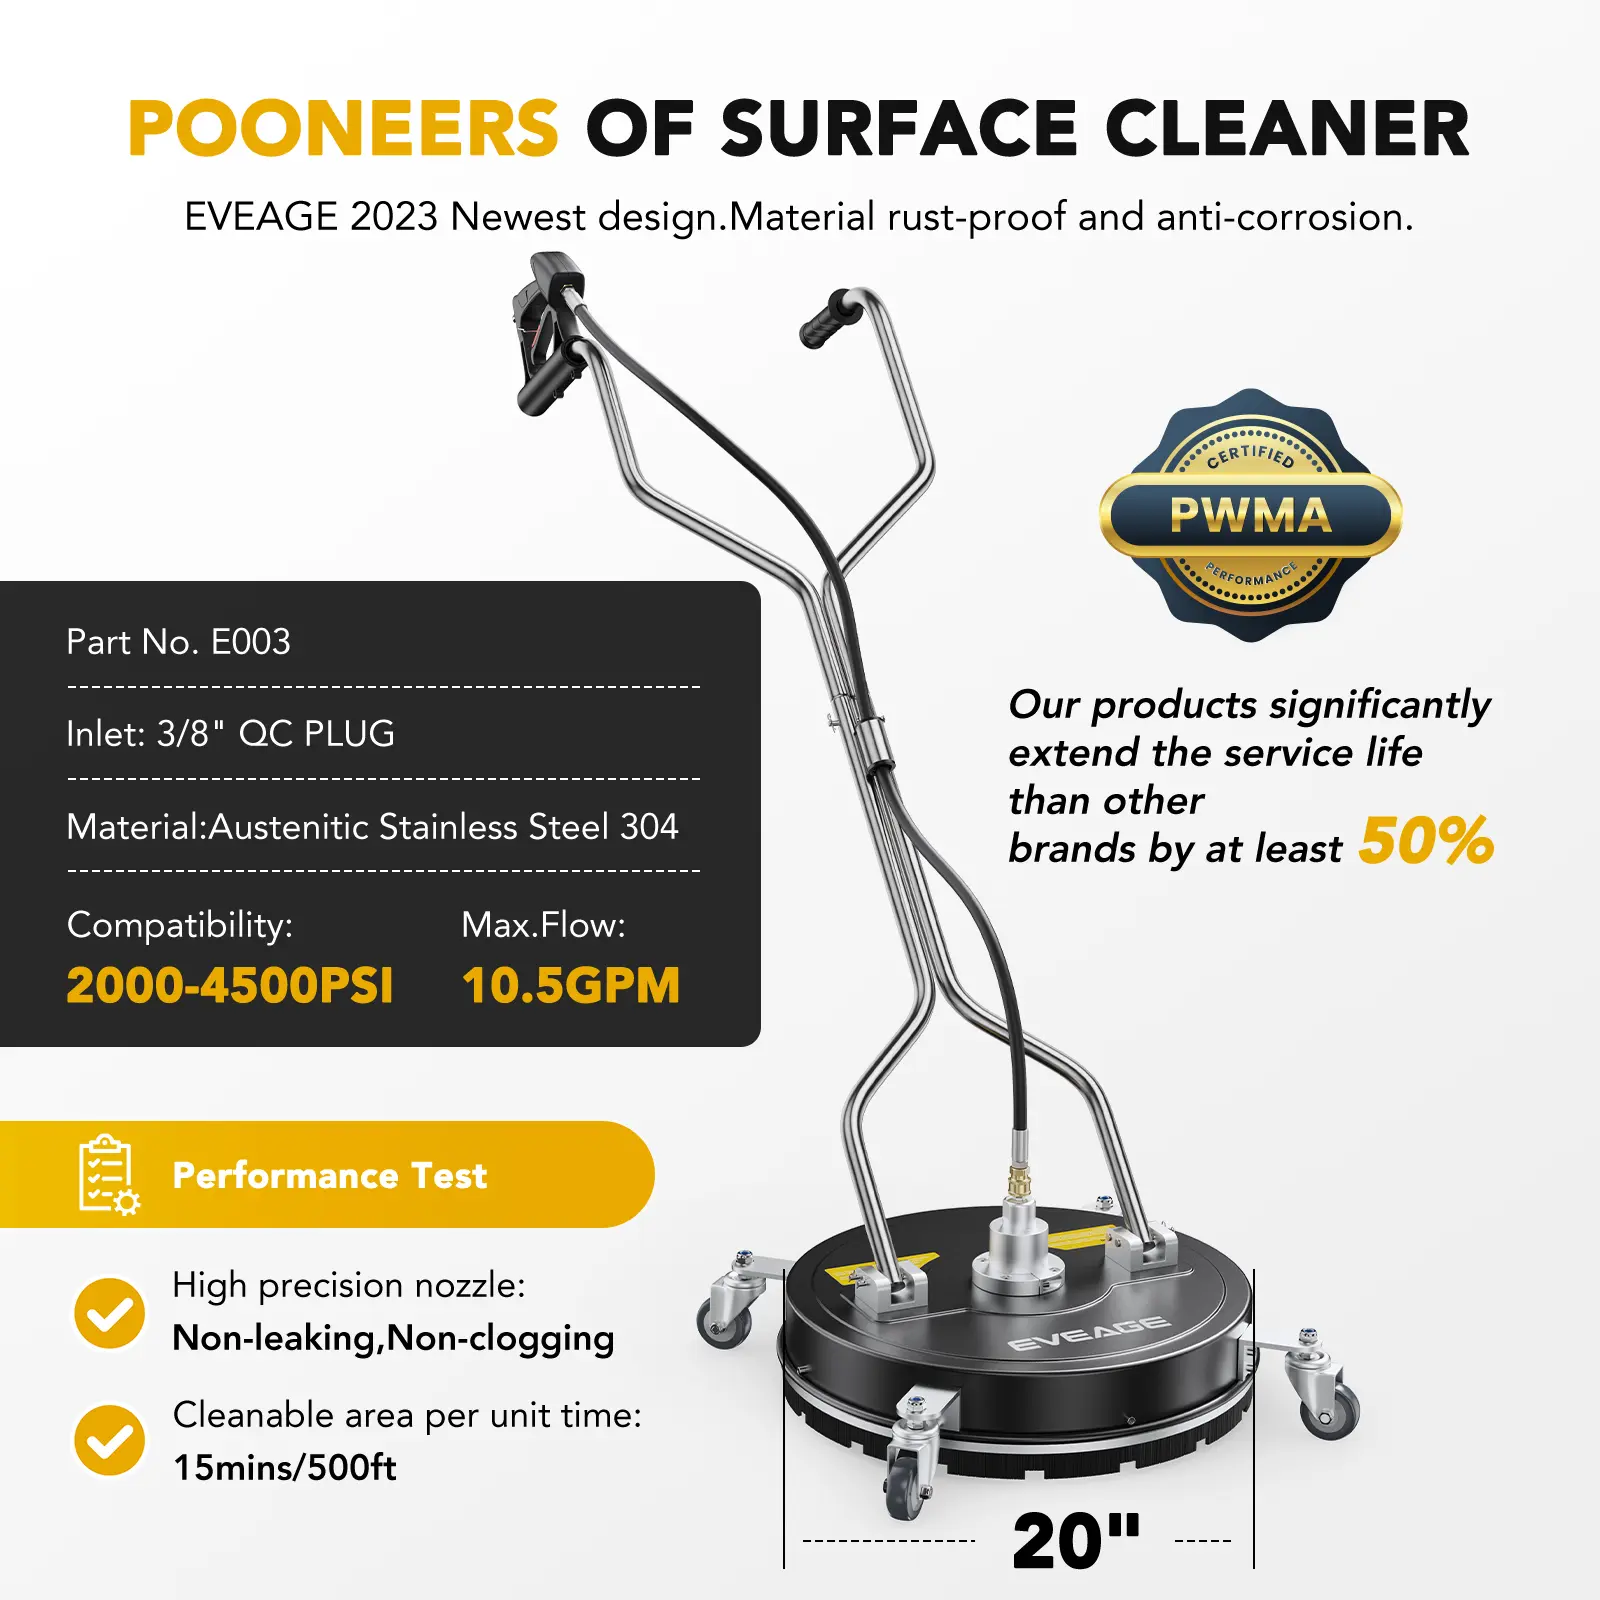 20 inch surface cleaner